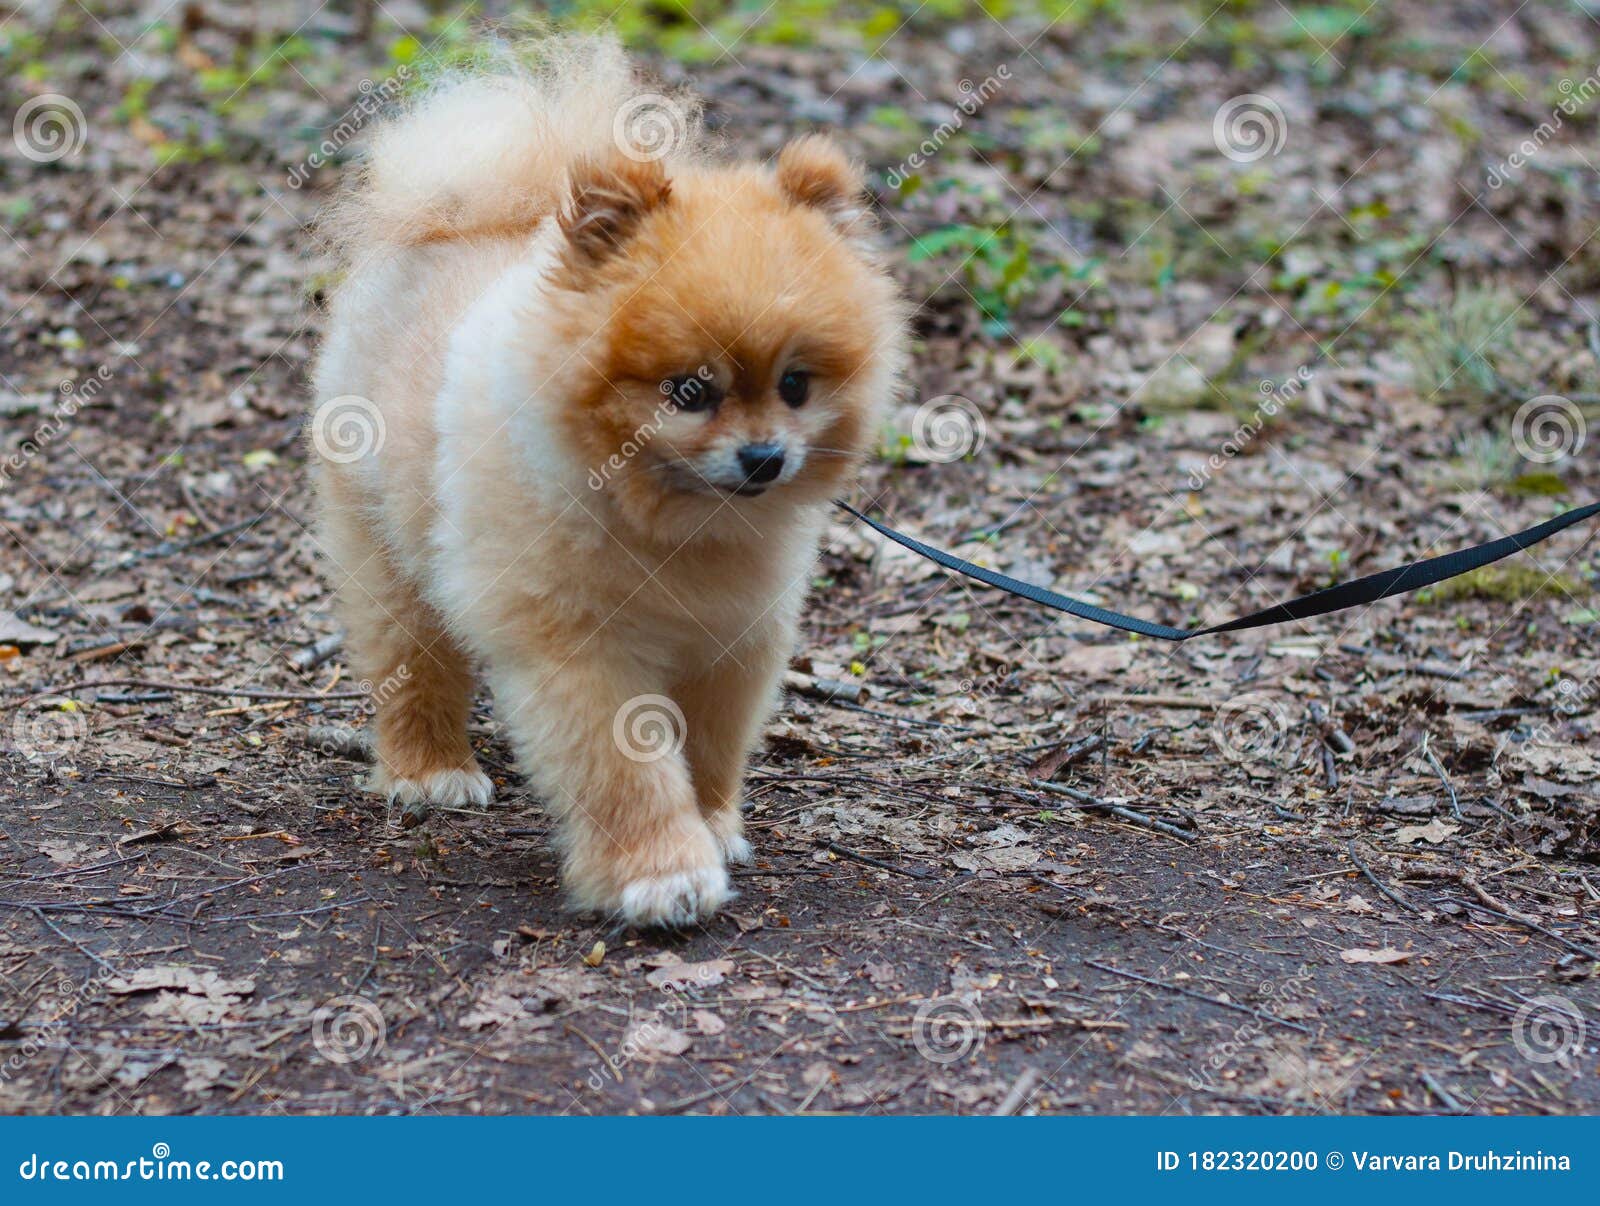 Pomeranian Mini Teddy Bear Red Color Walks on a Leash Goes Along the Path  Stock Photo - Image of pomeranian, toddler: 182320200